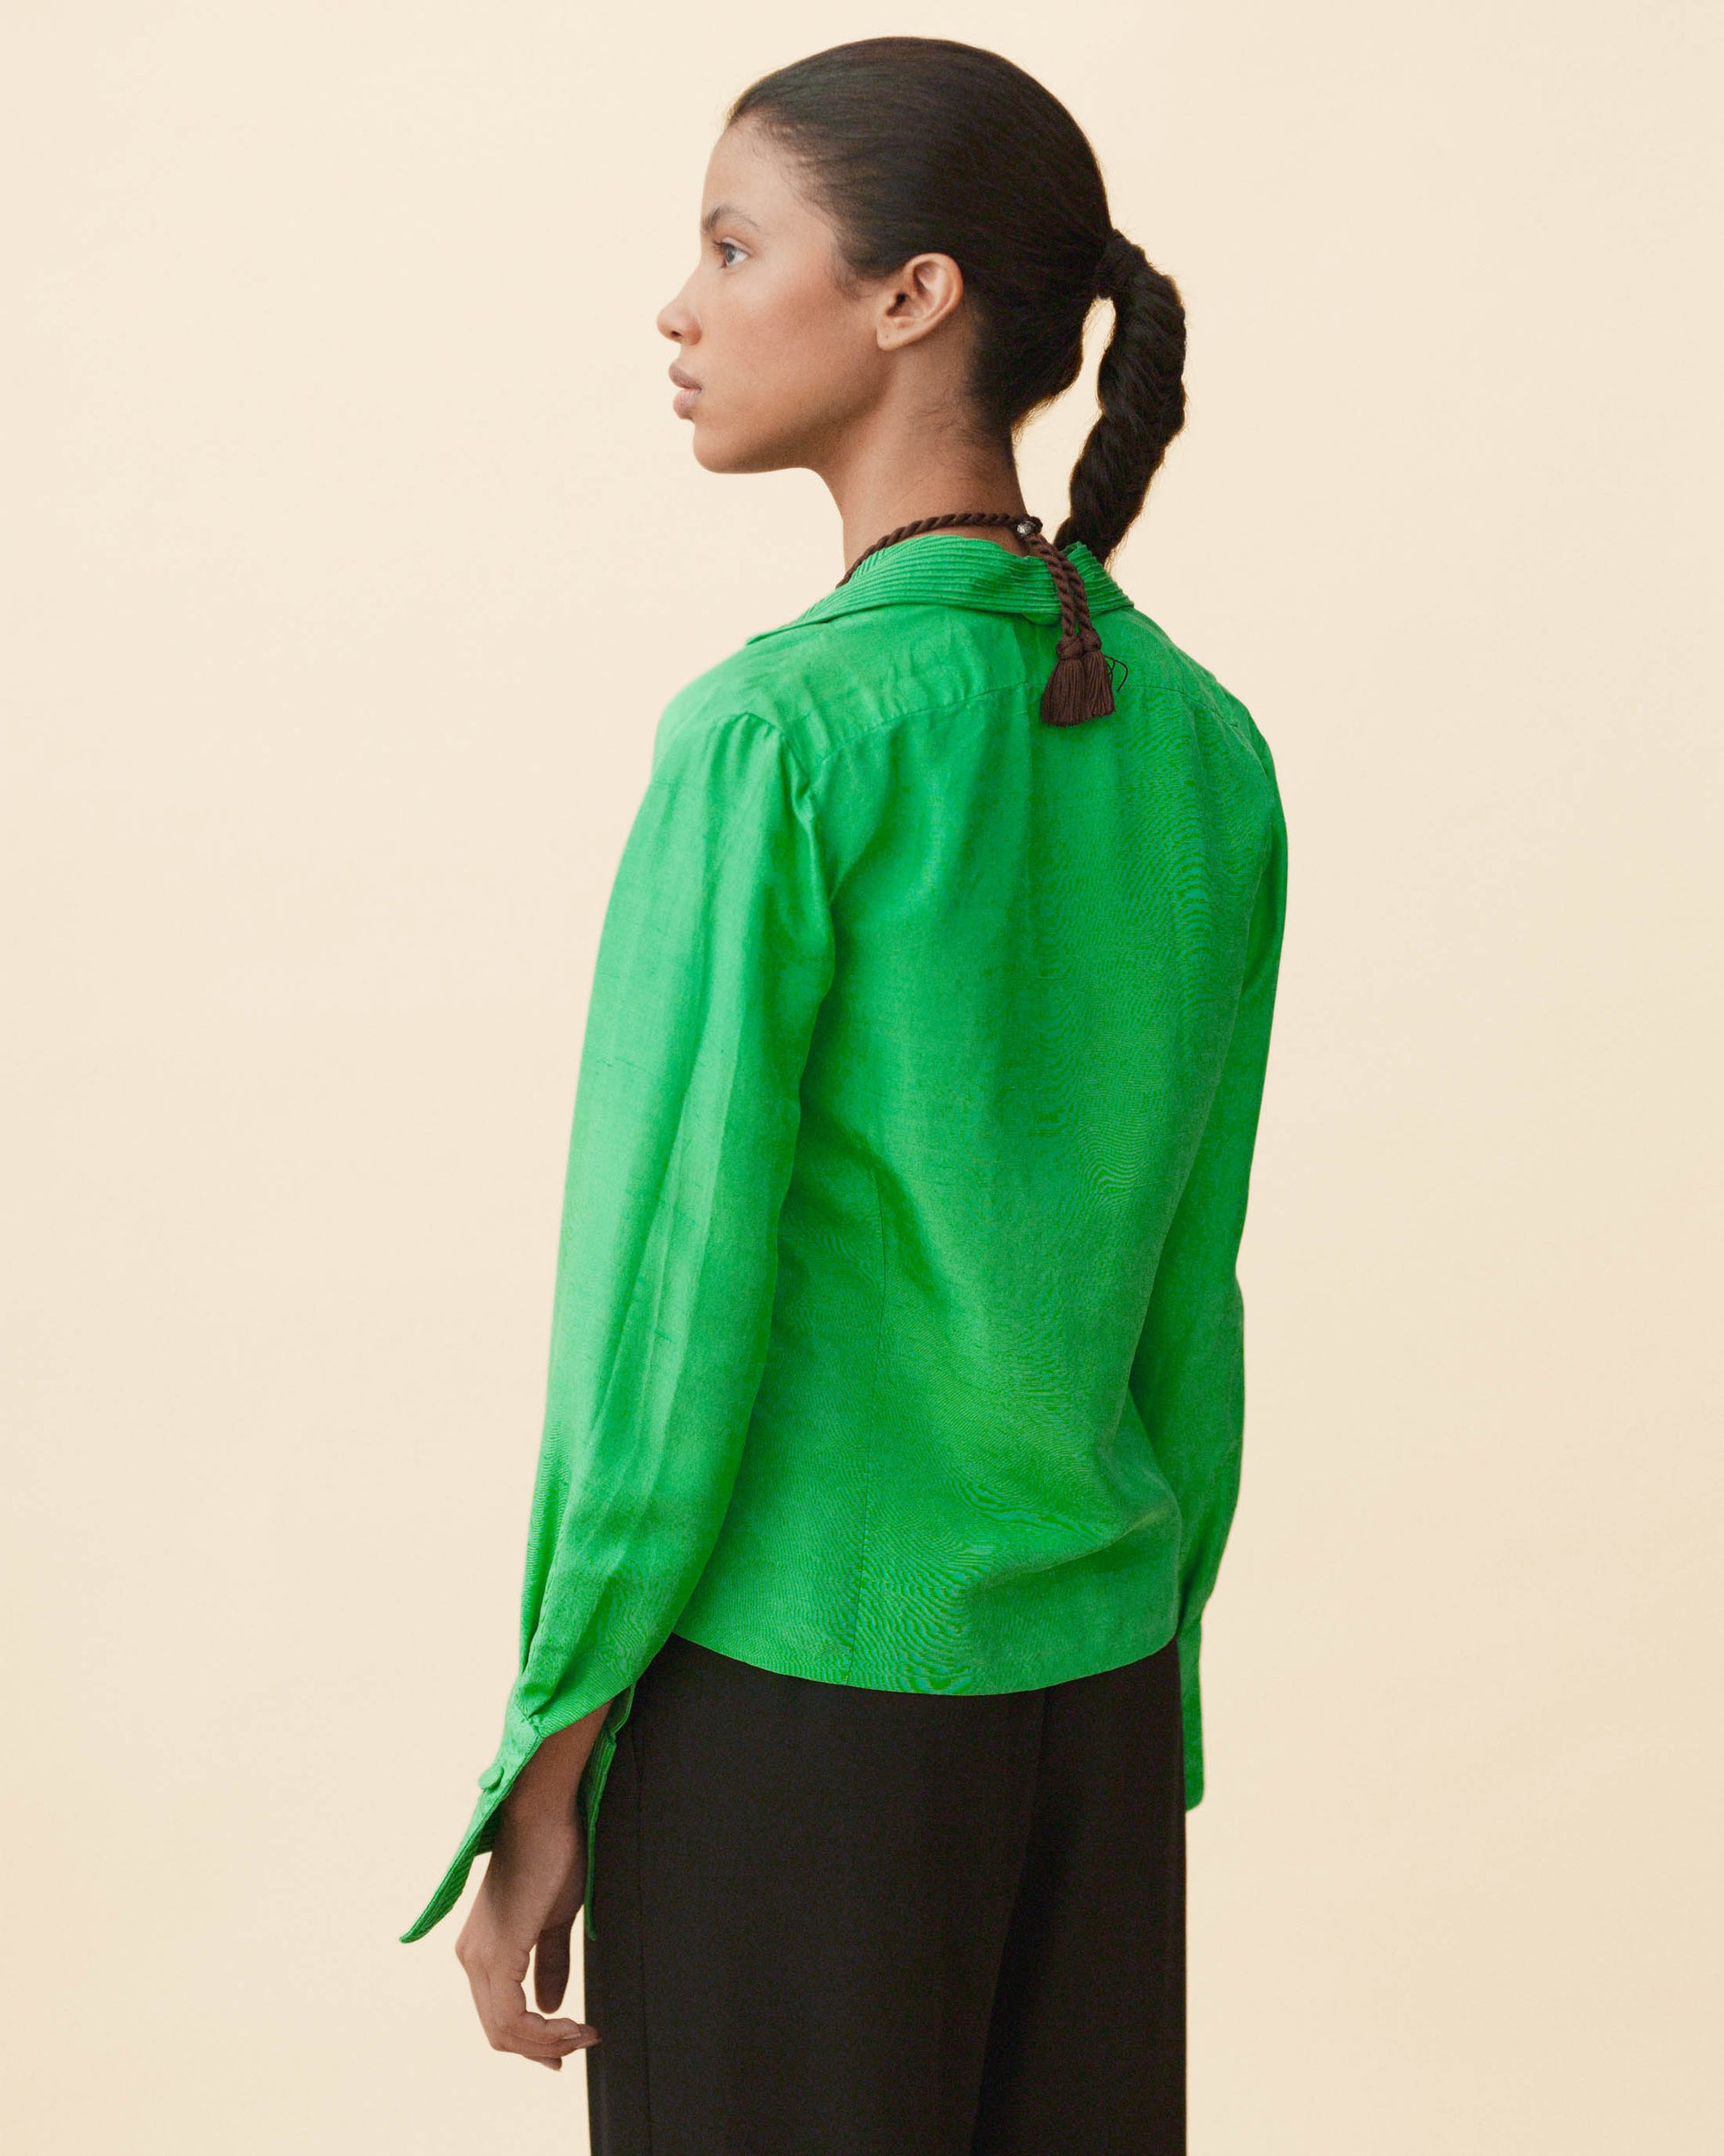 FALLON-shirt-carven-green-silk-vintage-women-luxury-clothing-rare-fashion-curated-art-collection